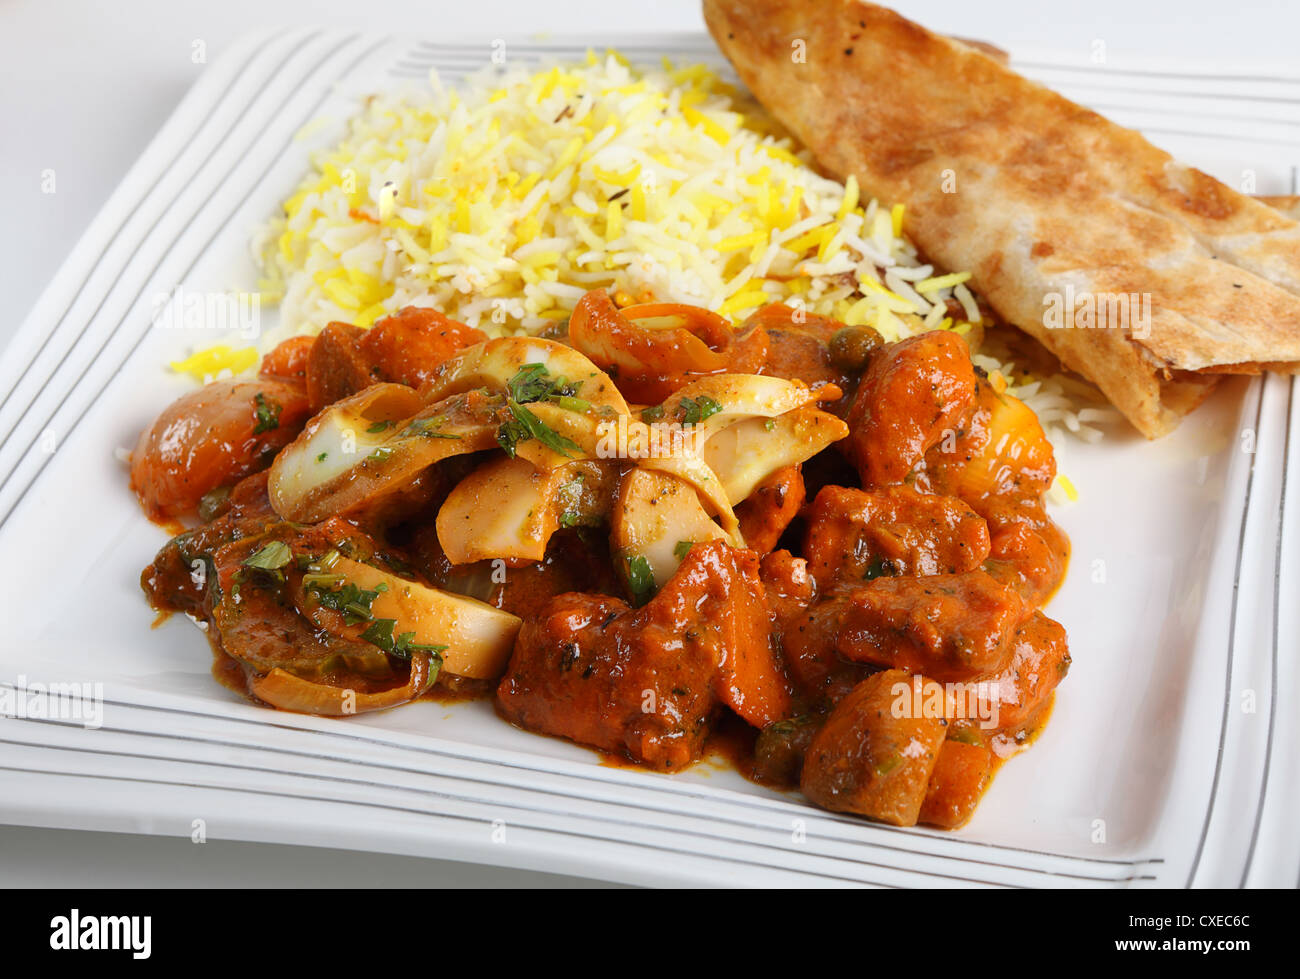 Chicken jalfrezi curry on a plate with pilau rice and a piece of naan bread. Stock Photo